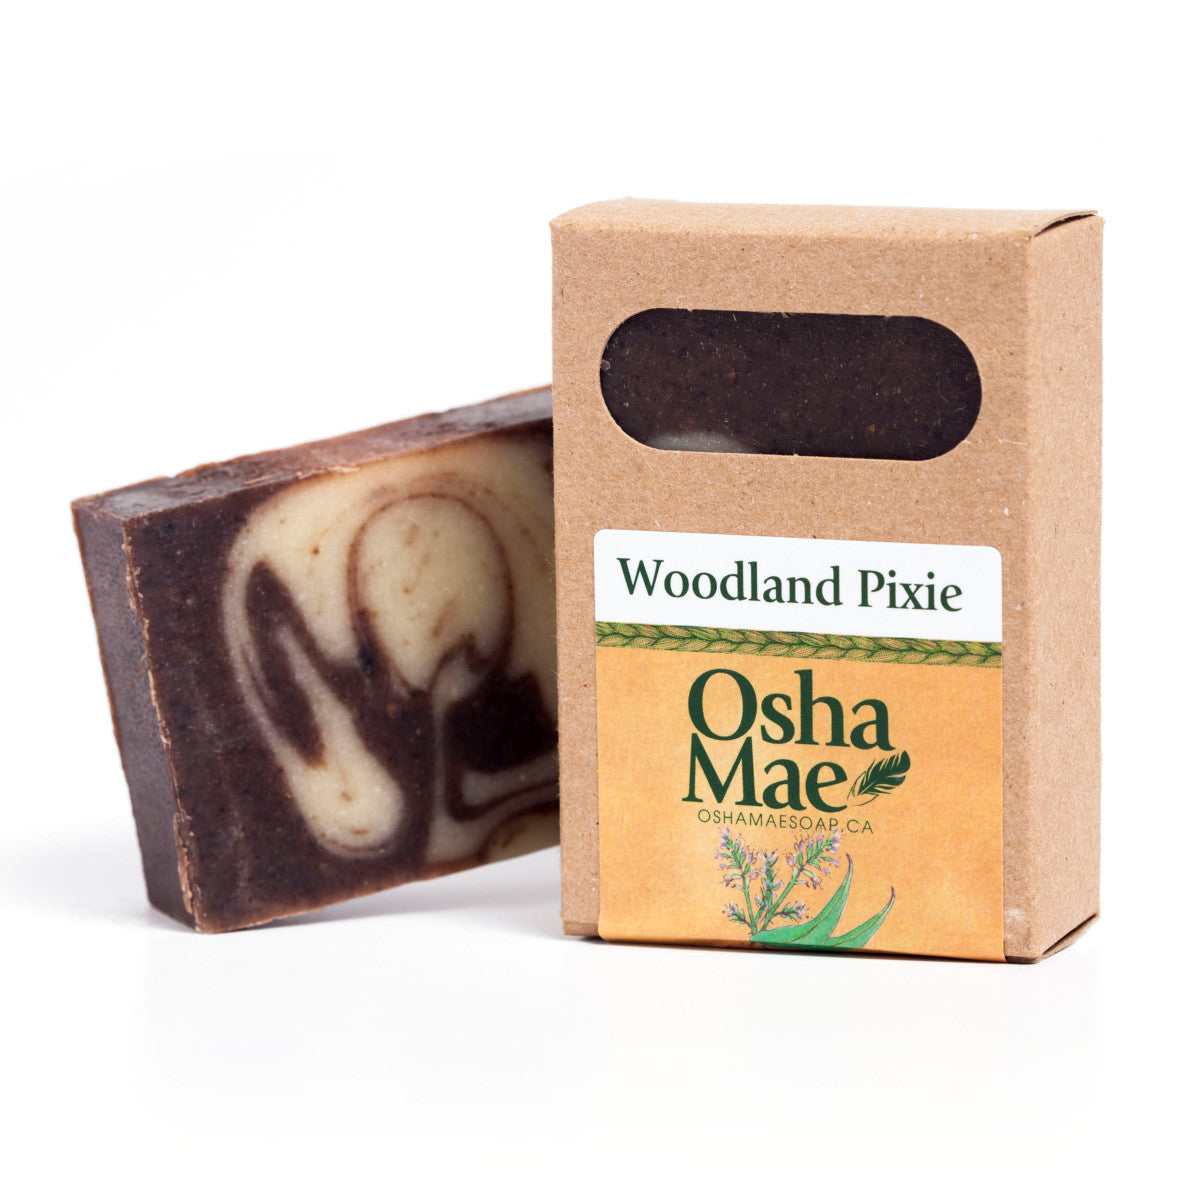 Made in Canada natural soap, handmade with patchouli and eucalyptus.